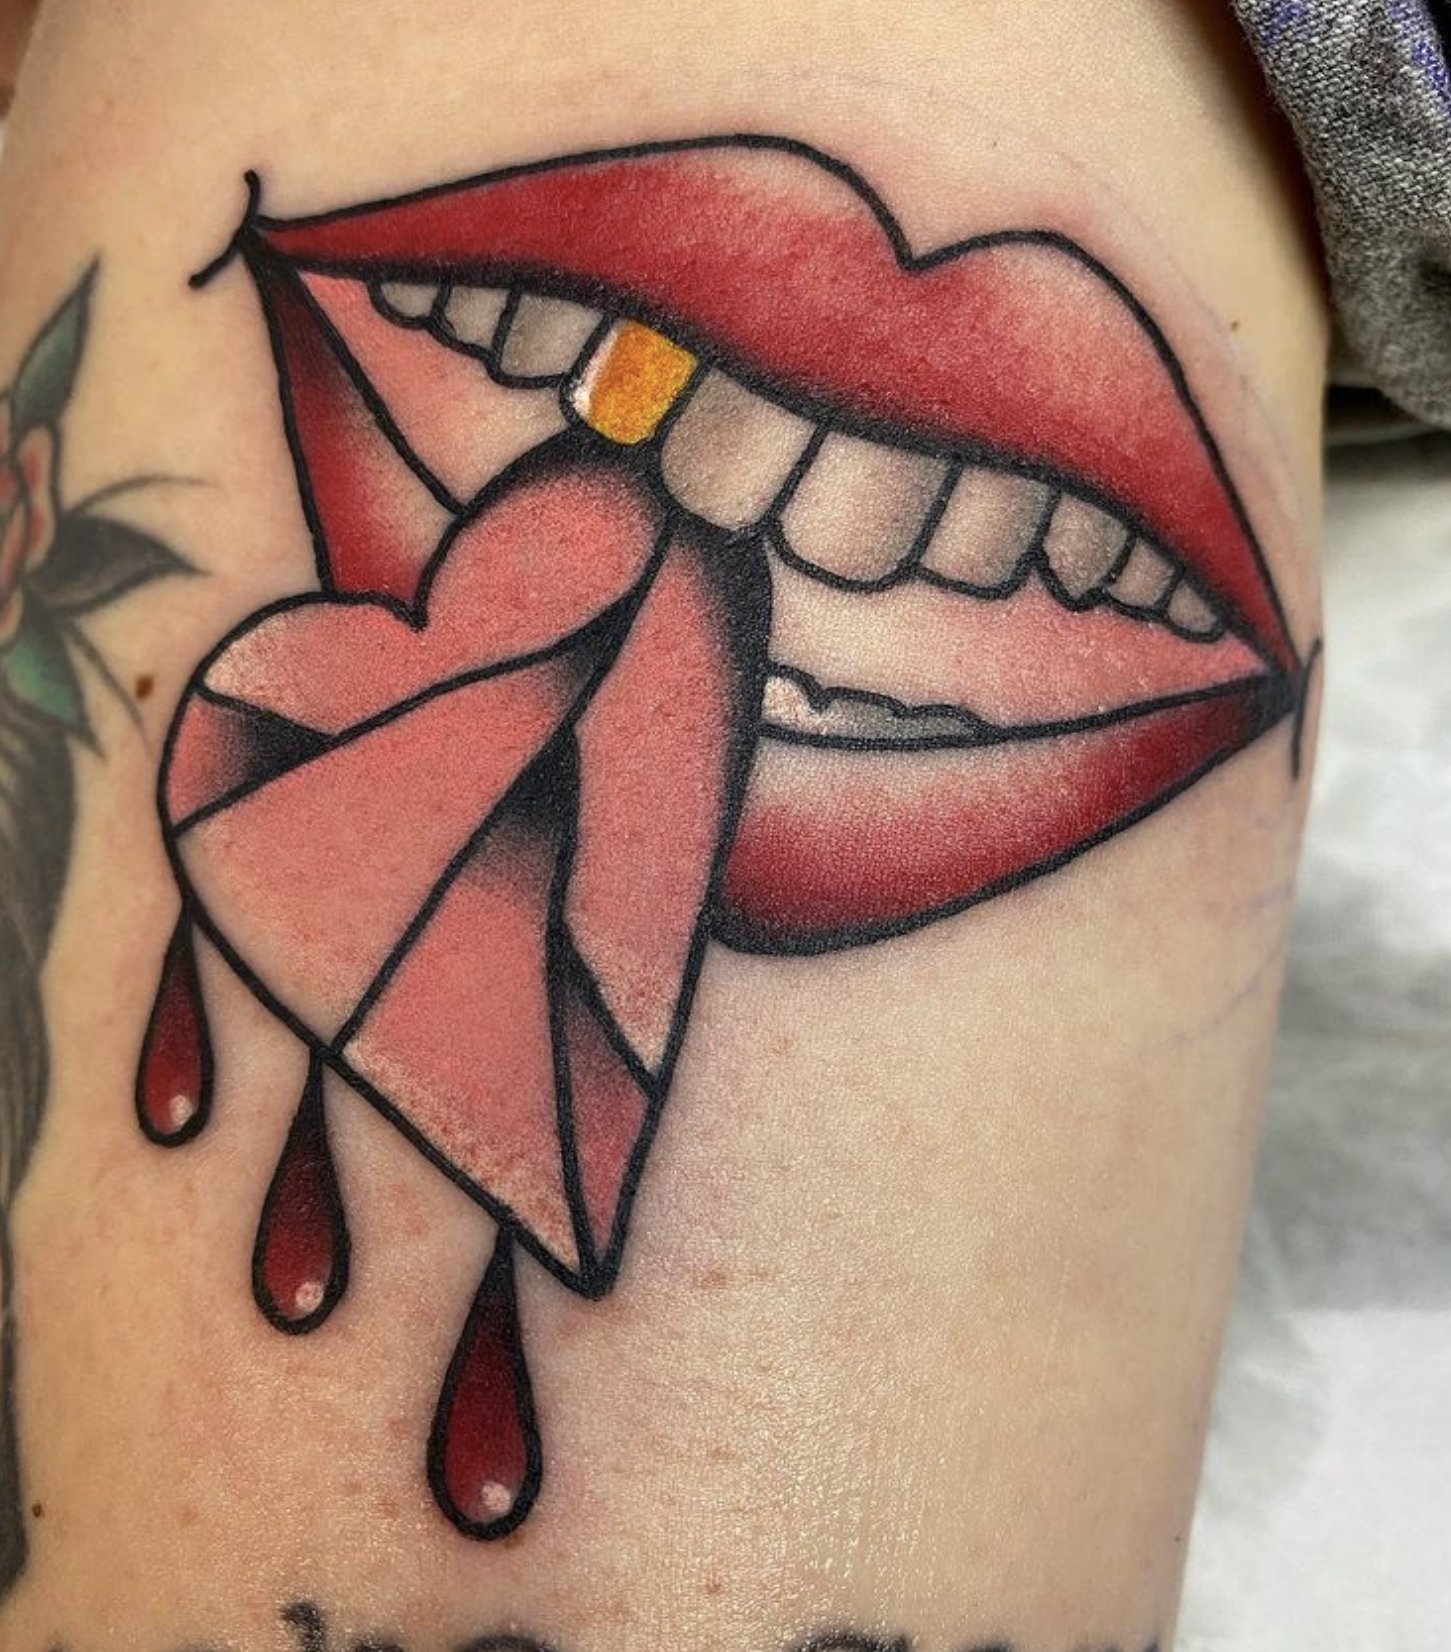 Benny Smalls — MOTH AND FLAME TATTOO